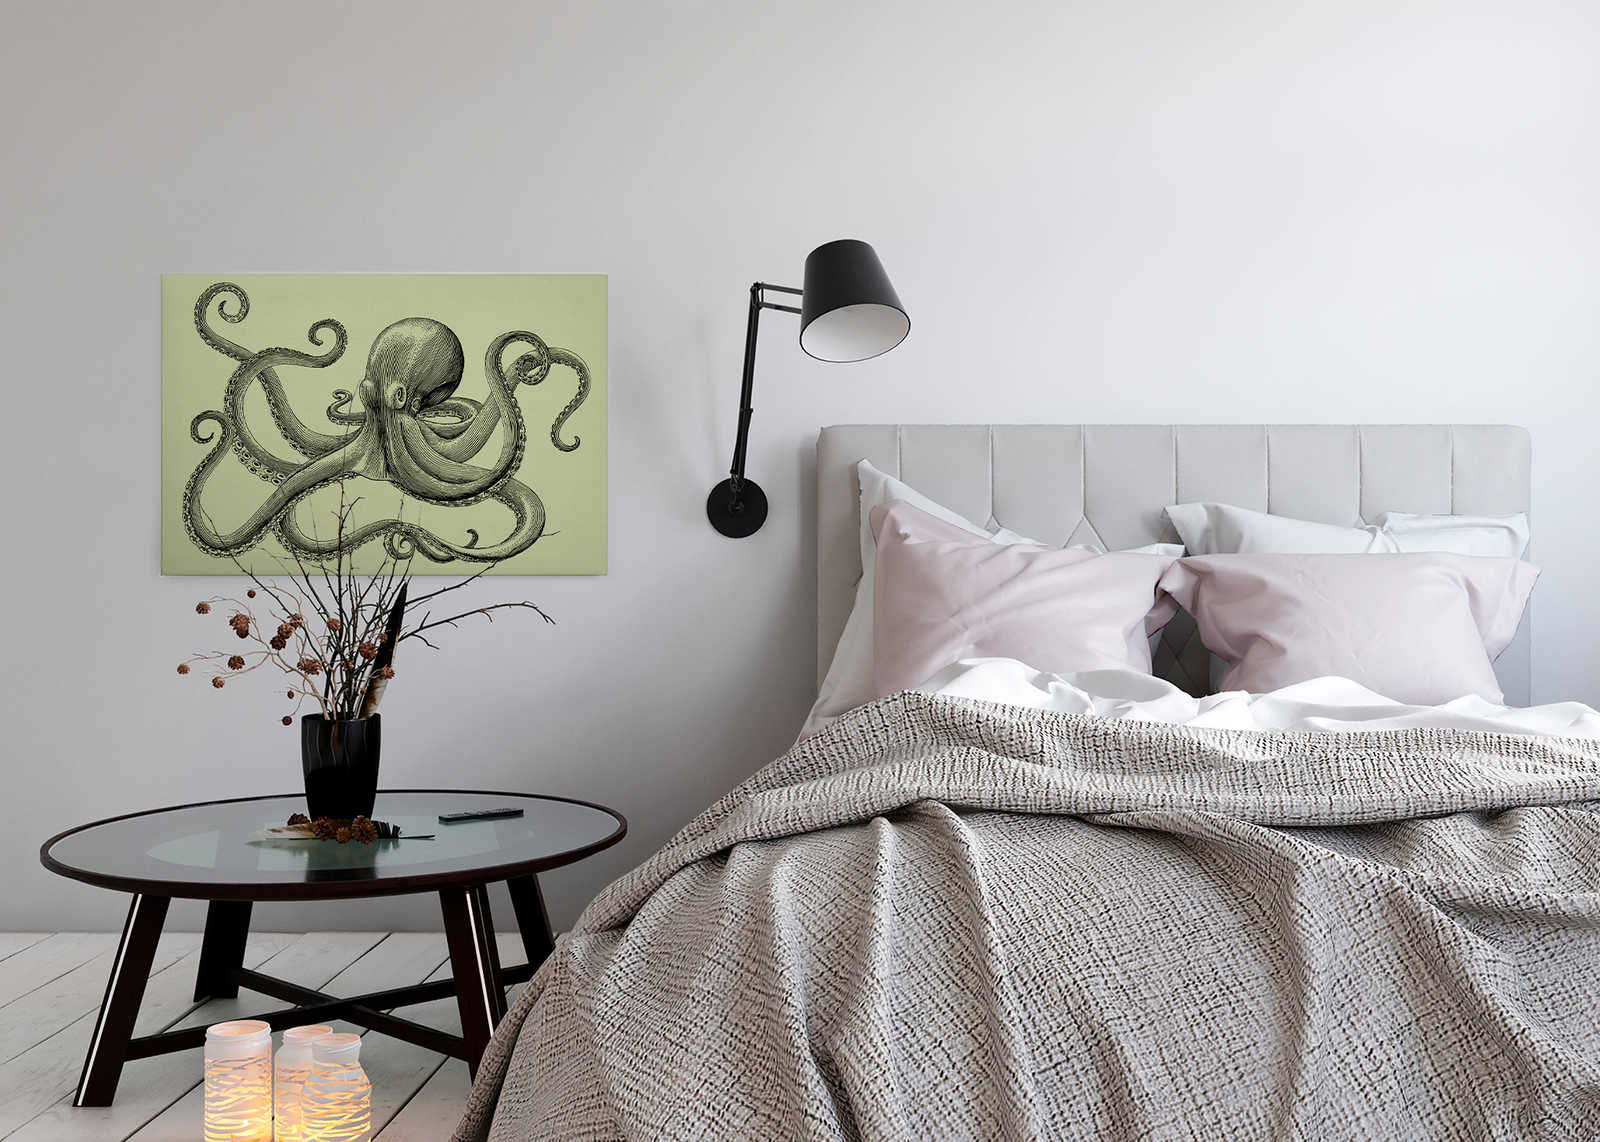             Jules 3 - Canvas painting Octopus in Sketch Style & Vintage Look- Cardboard Structure - 0.90 m x 0.60 m
        